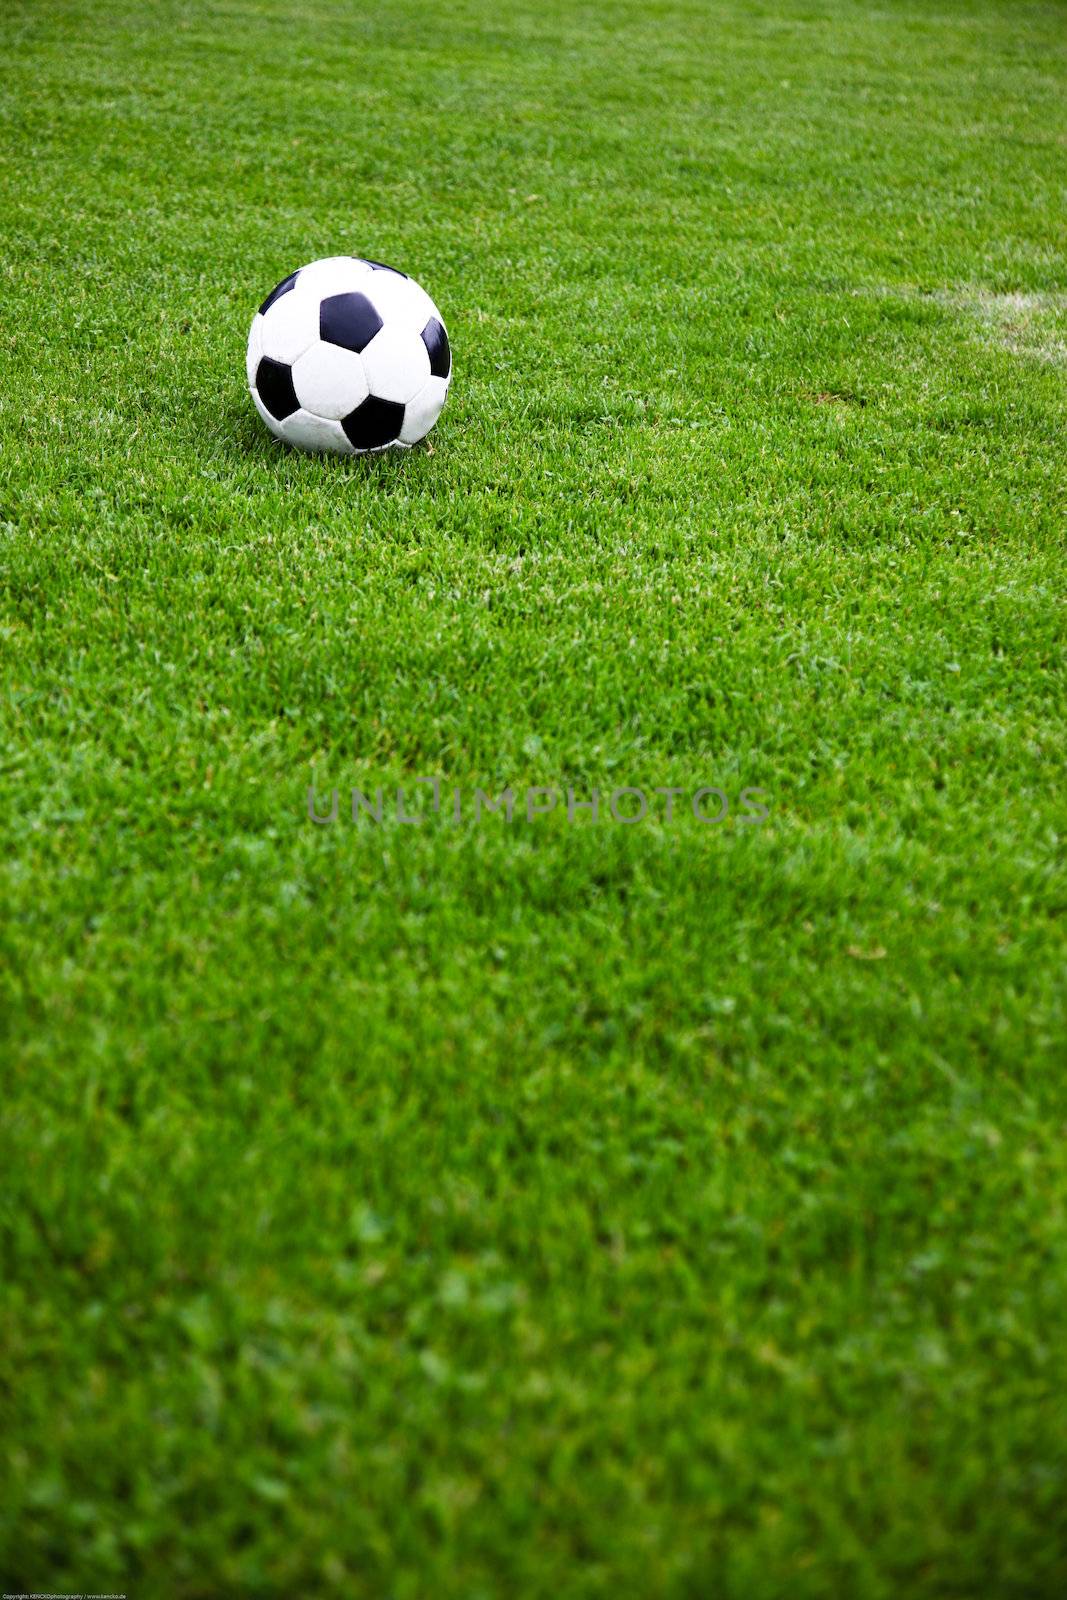 Soccer Ball On A Grassy Field by nfx702